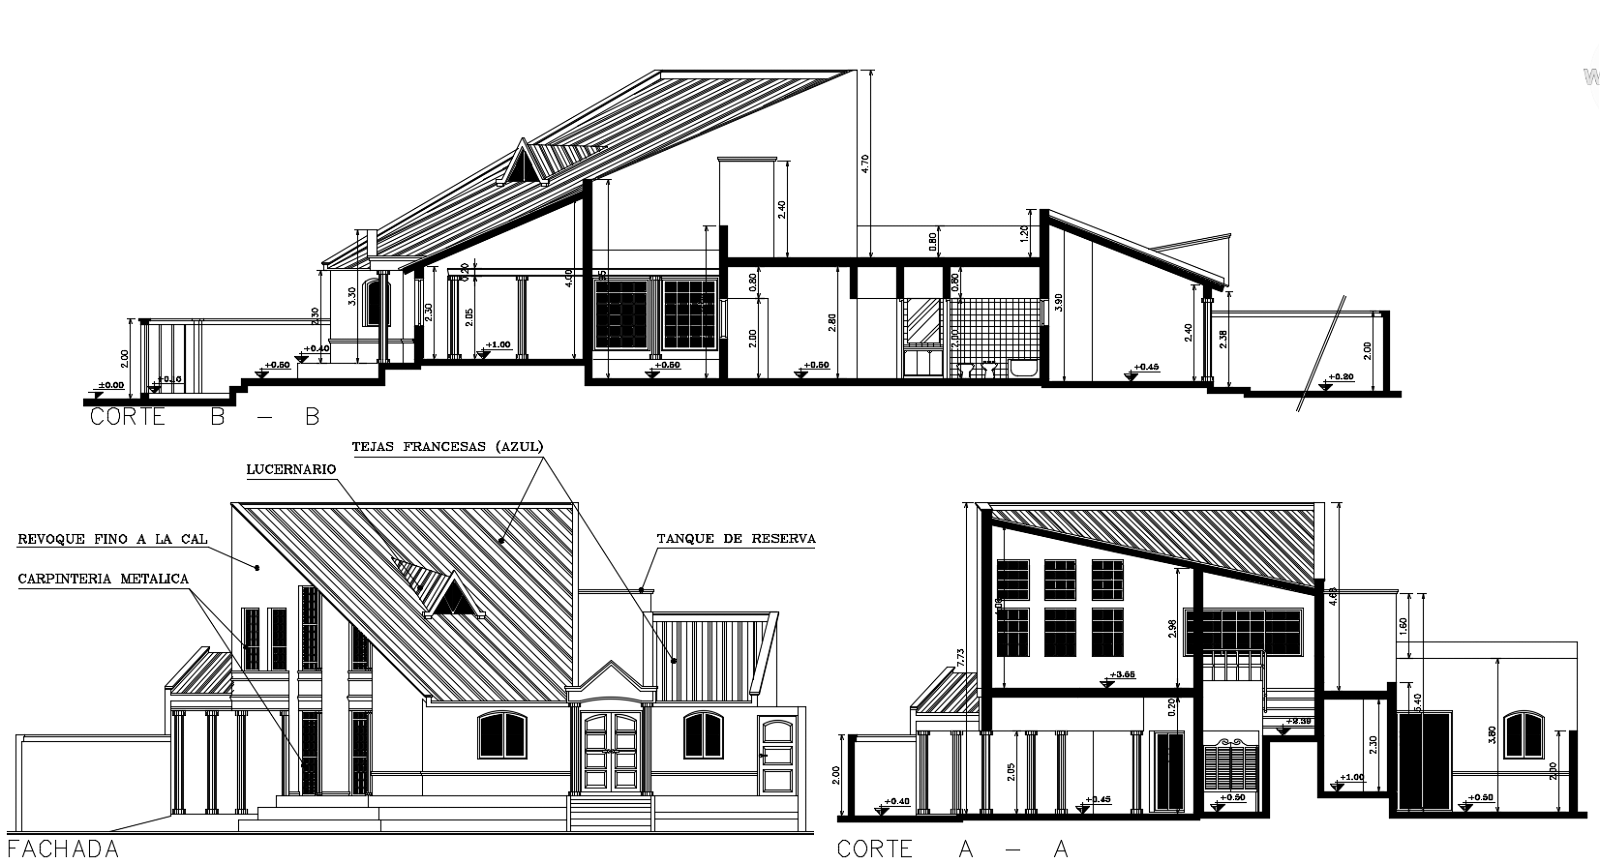 Elevation drawing of the house in dwg file - Cadbull